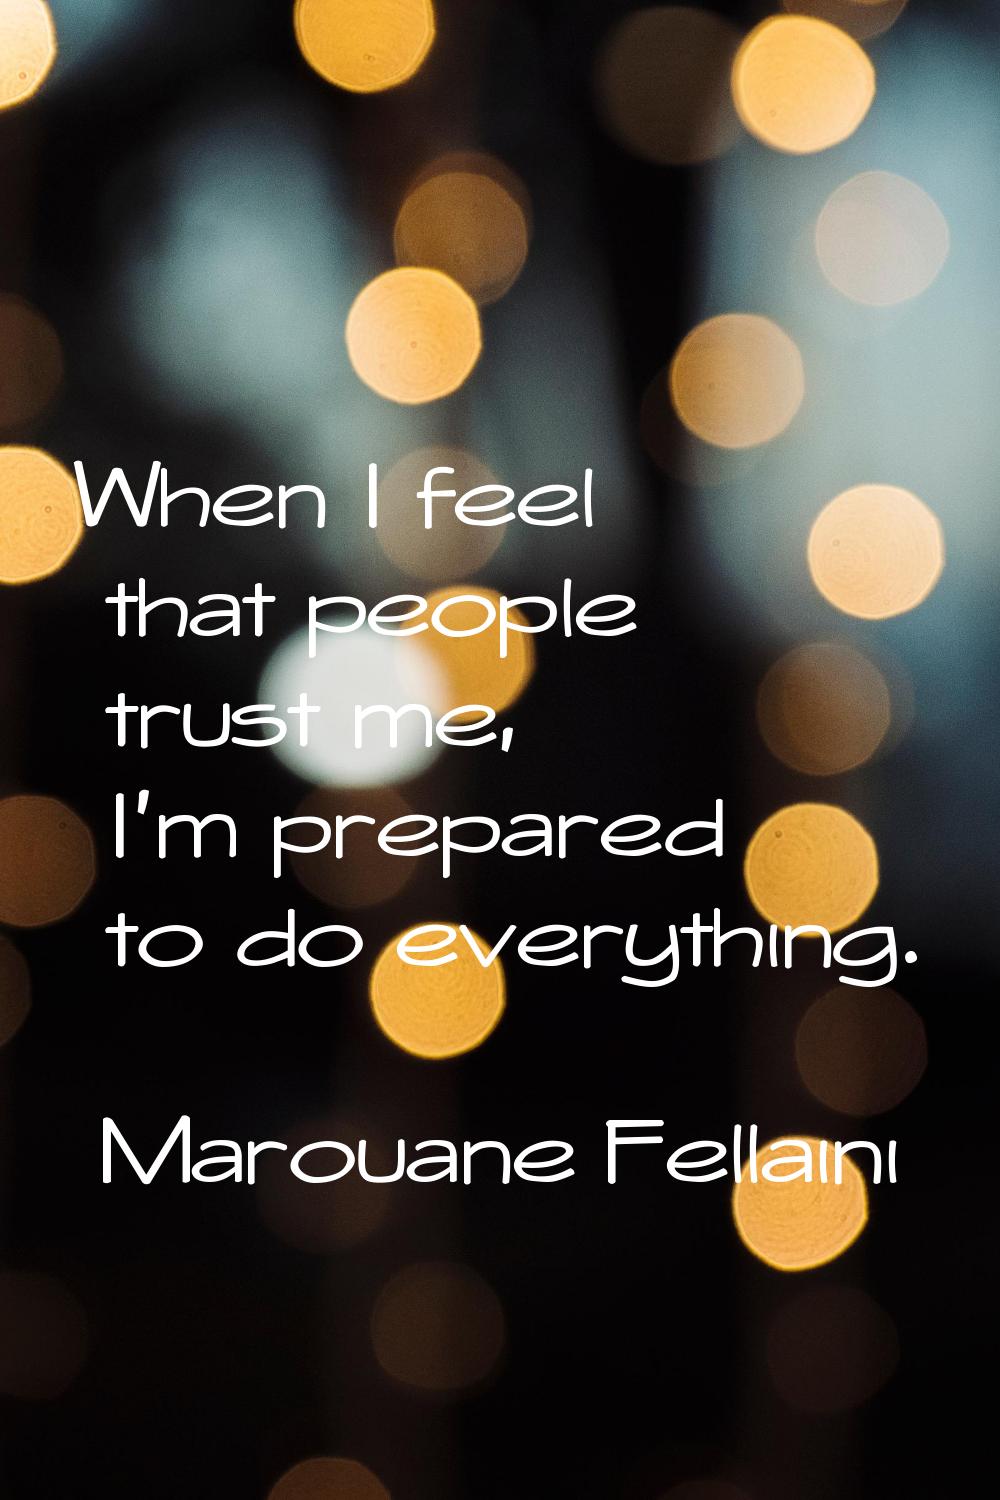 When I feel that people trust me, I'm prepared to do everything.